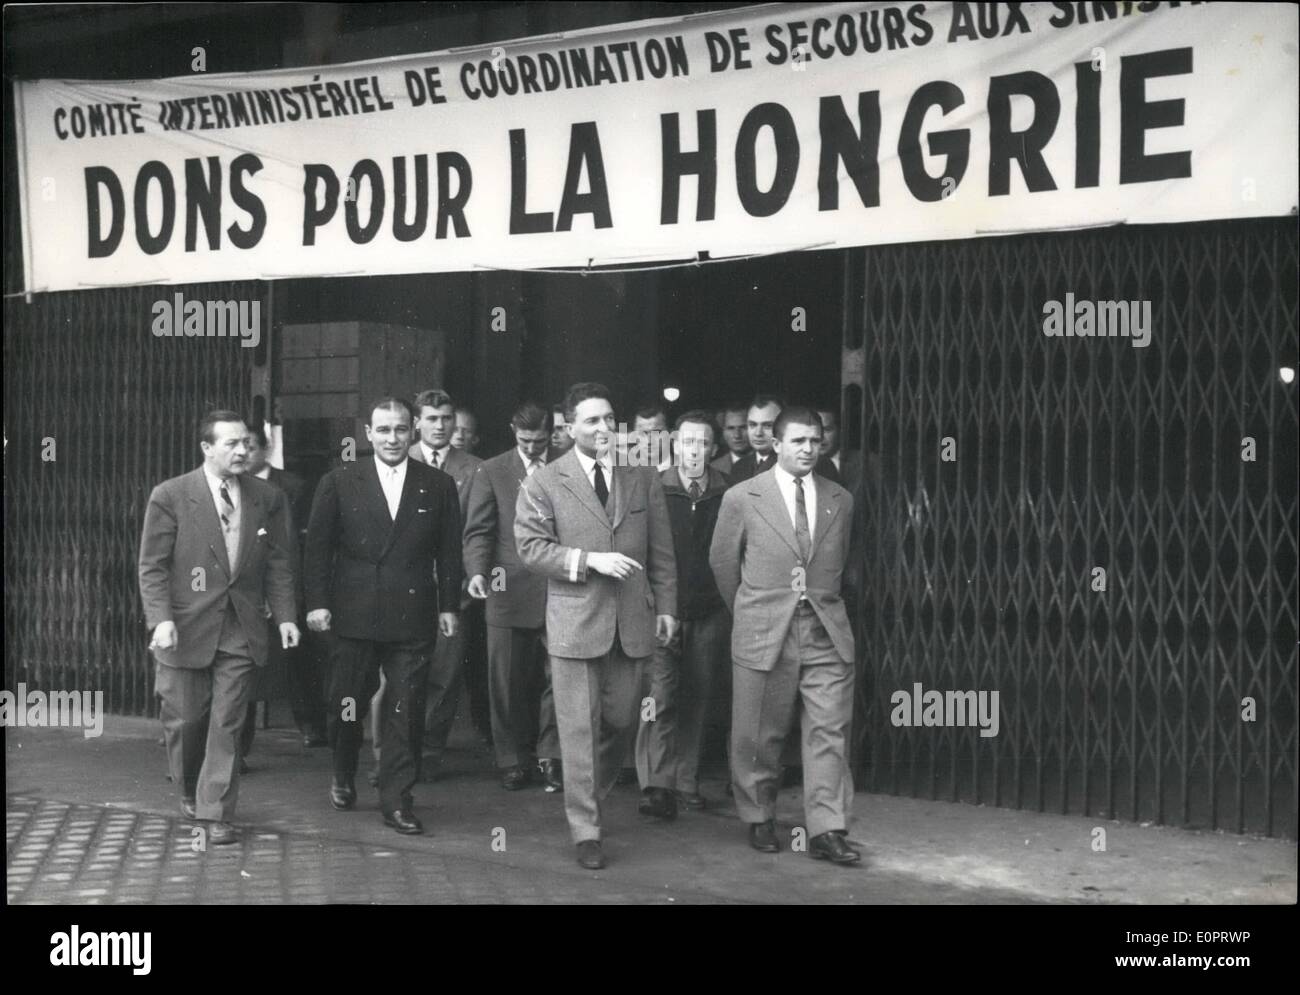 Nov. 11, 1956 - Hungarian Footballers visit Paris centre for Parcels for Hungary: Puskas and some of his team-mates of honved who will play versus racing in Paris tomorrow visited the Gare D'Orsay where food and meddecing Parcels are being sorted out for Shipment to Hungary. Photo Shows Puskas (extreme right) and his comrades leaving the Gare 'Orsay after their visit this morning. Stock Photo